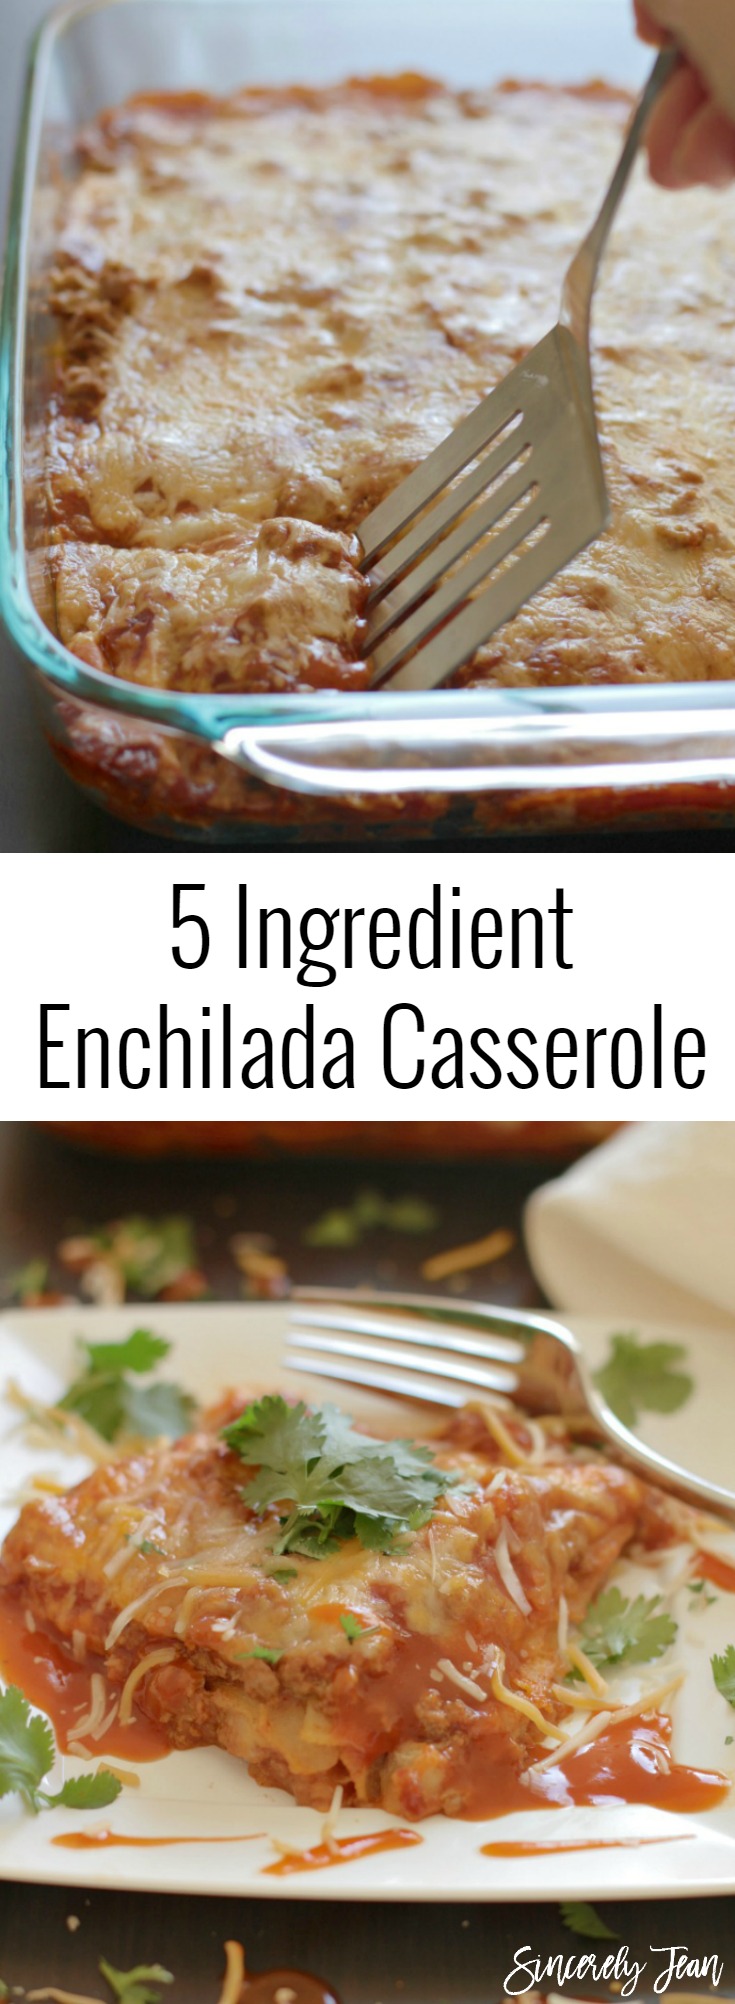 Enchilada Casserole - 5 INGREDIENTS - delicious and simple family dinner recipe! | www.SincerelyJean.com